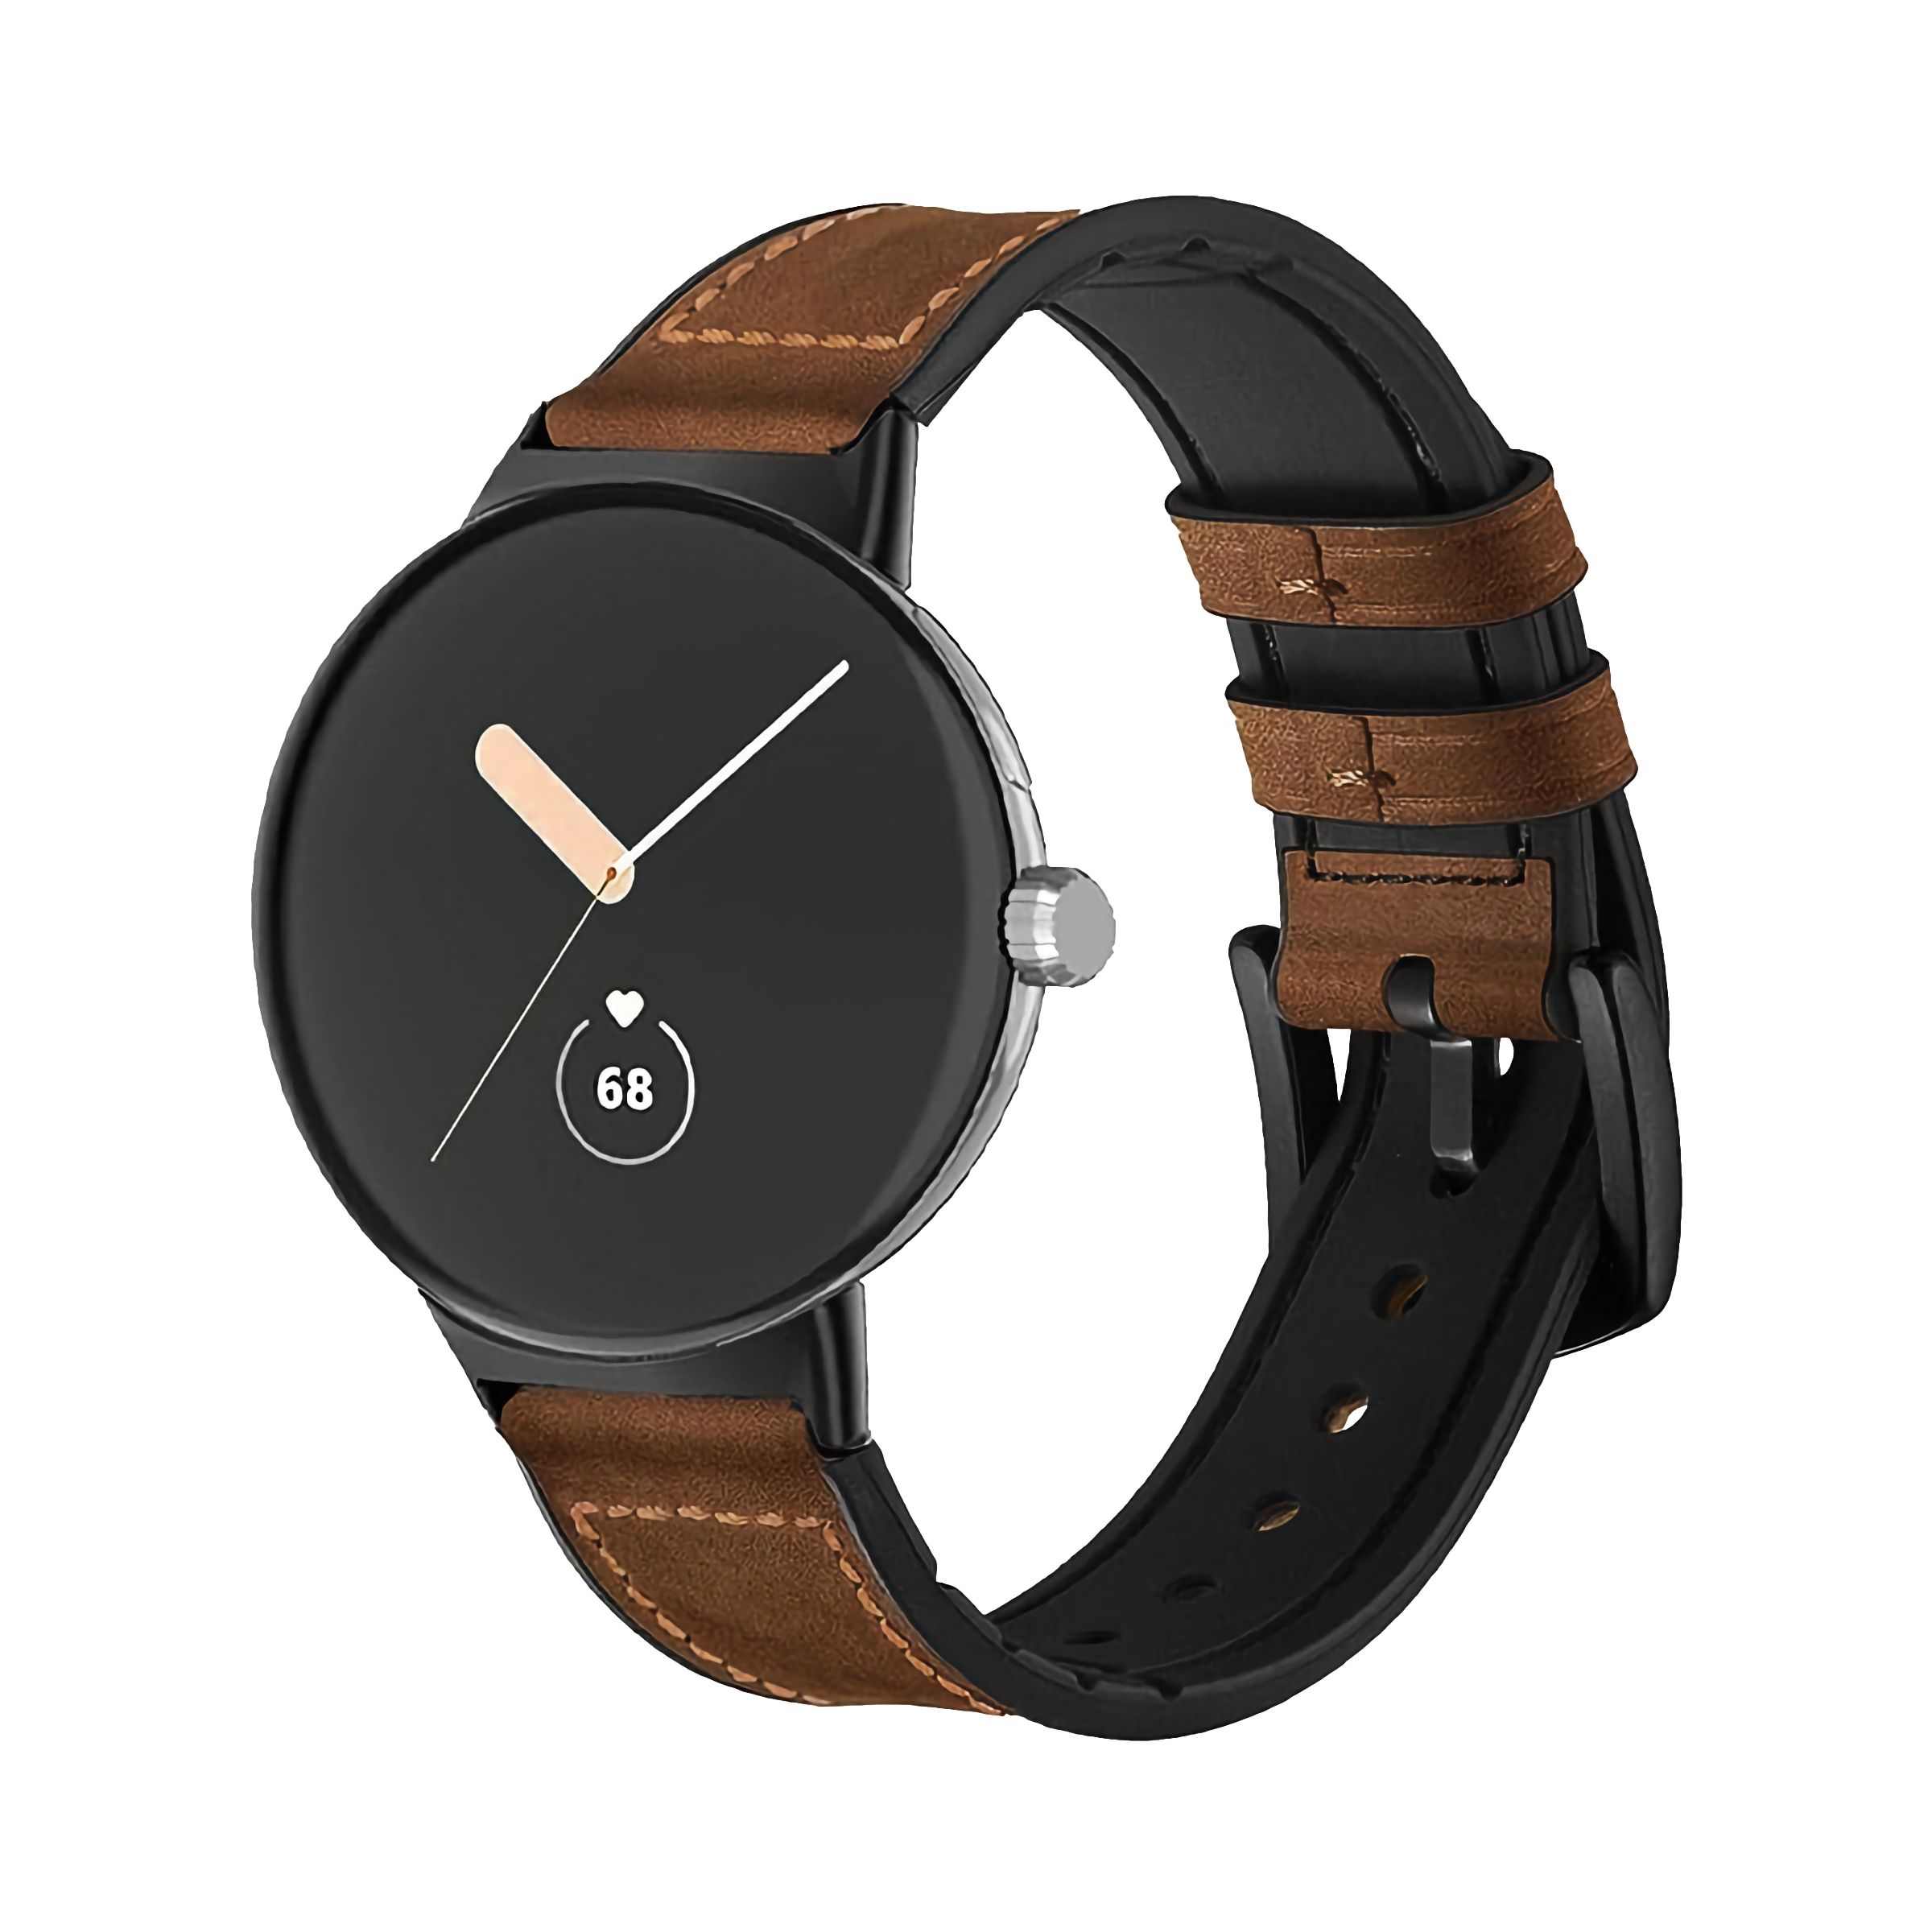 A brown leather band with a metal buckle attached to a round smartwatch.